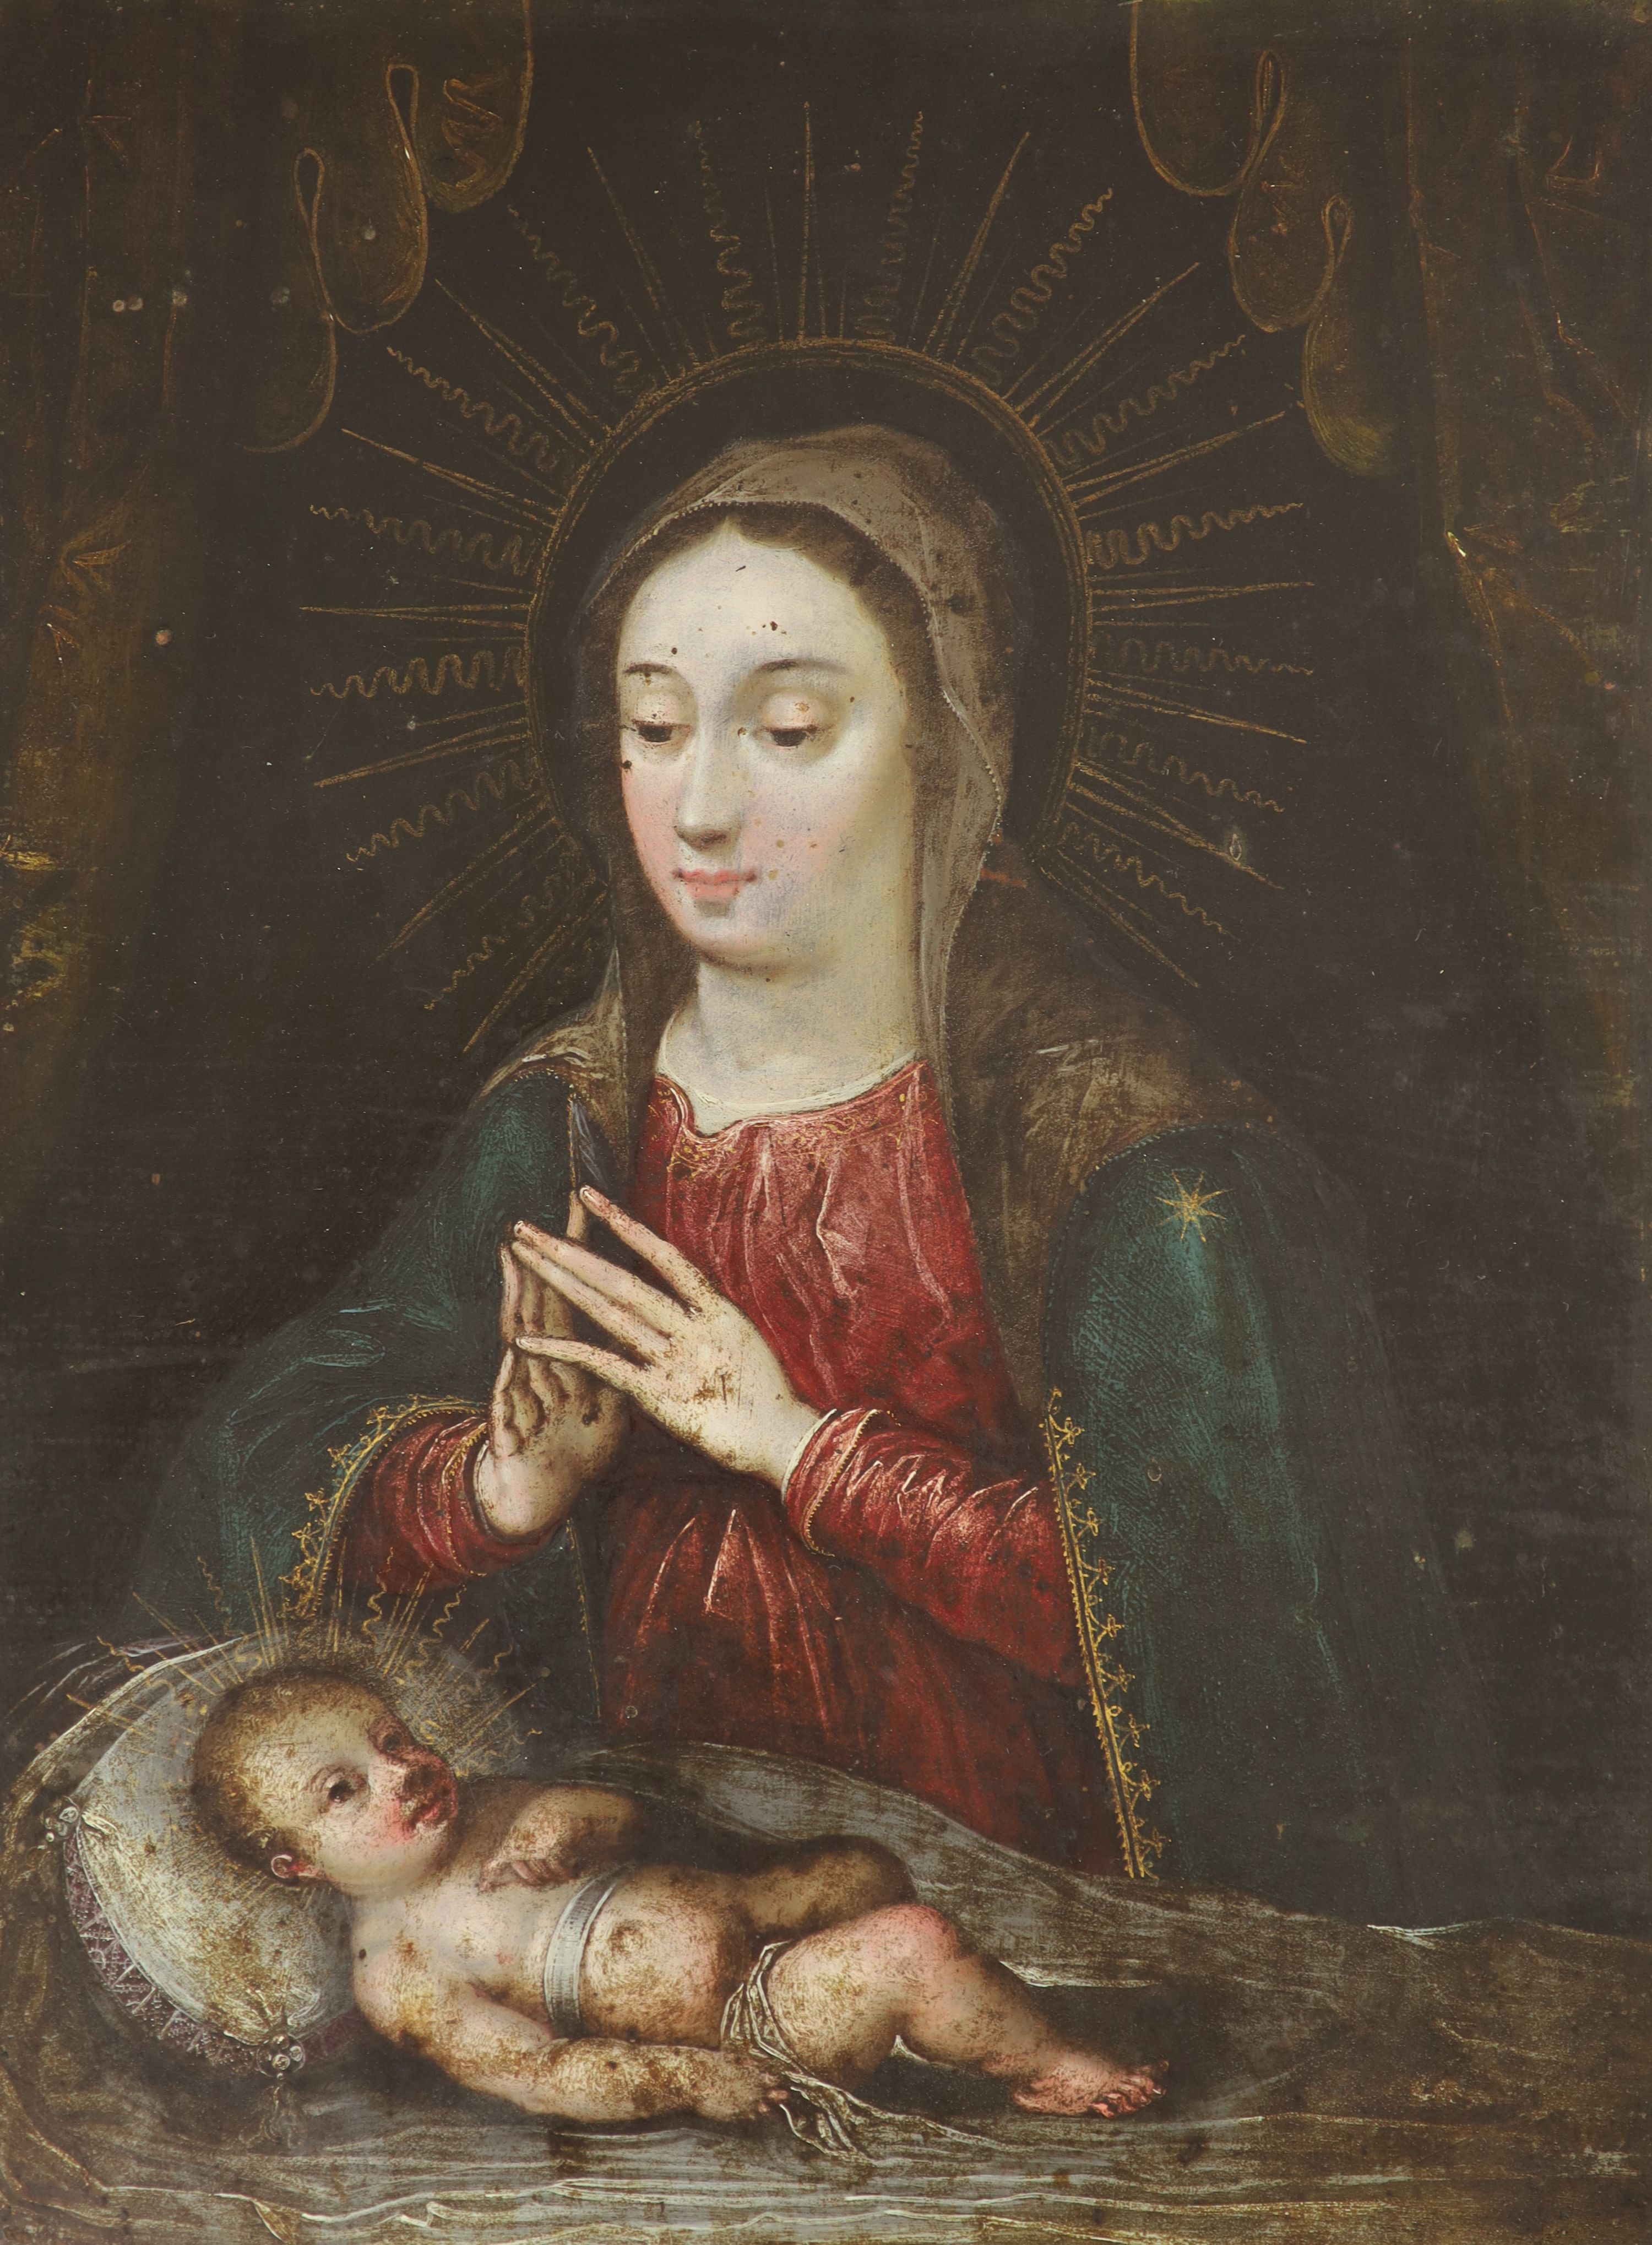 17th Century Spanish School , The Madonna and Child, oil on copper panel, 29 x 22cm, unframed